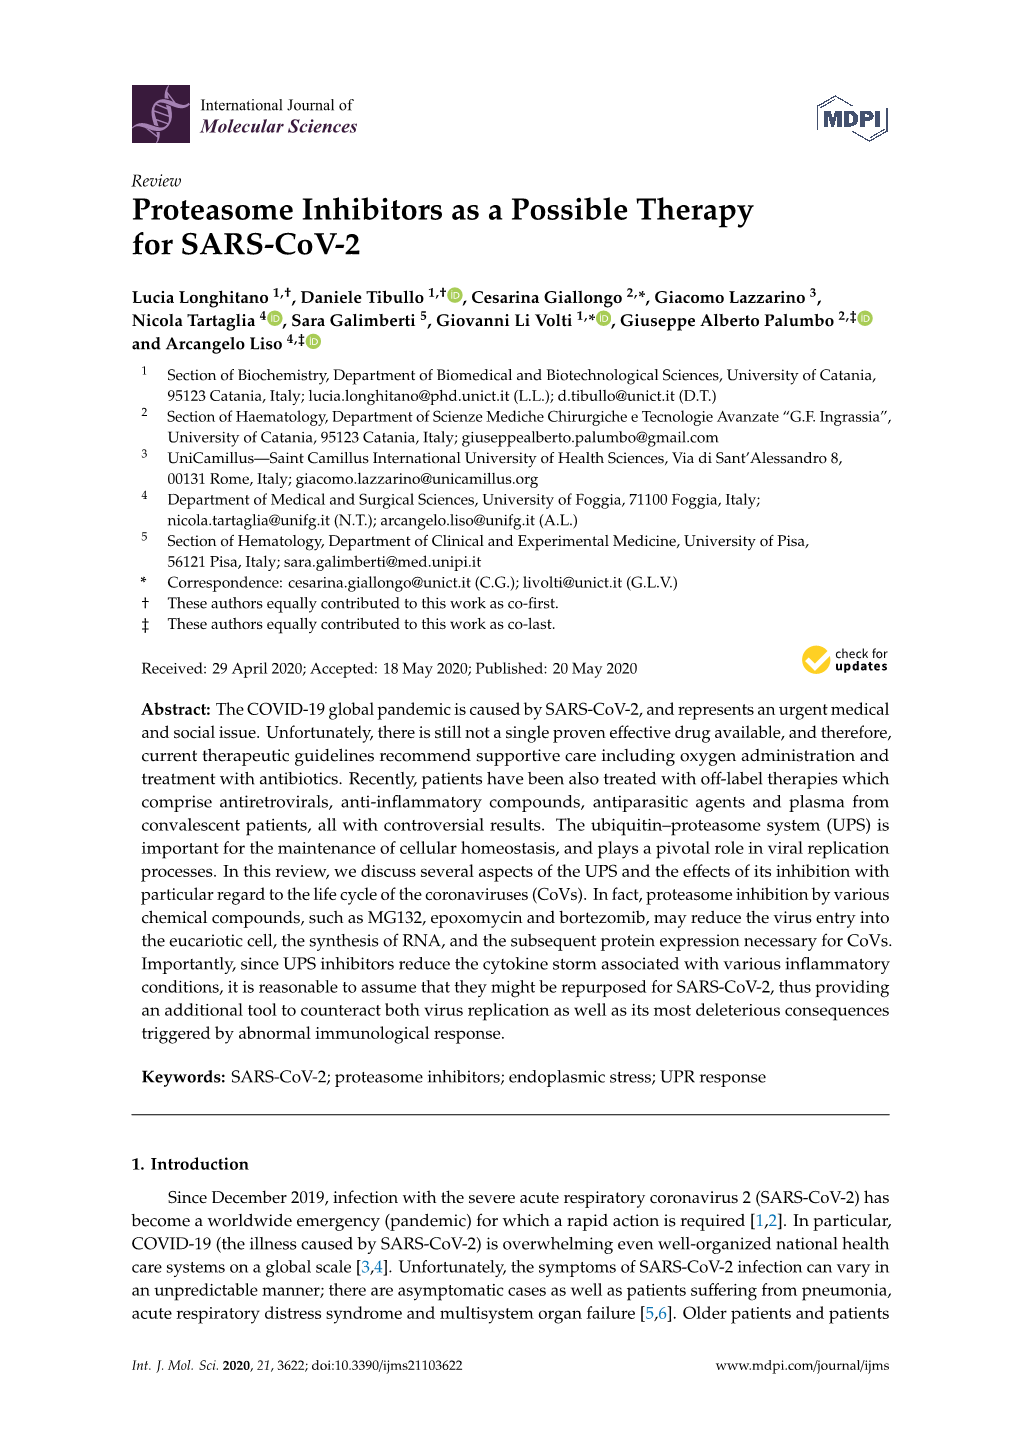 Proteasome Inhibitors As a Possible Therapy for SARS-Cov-2